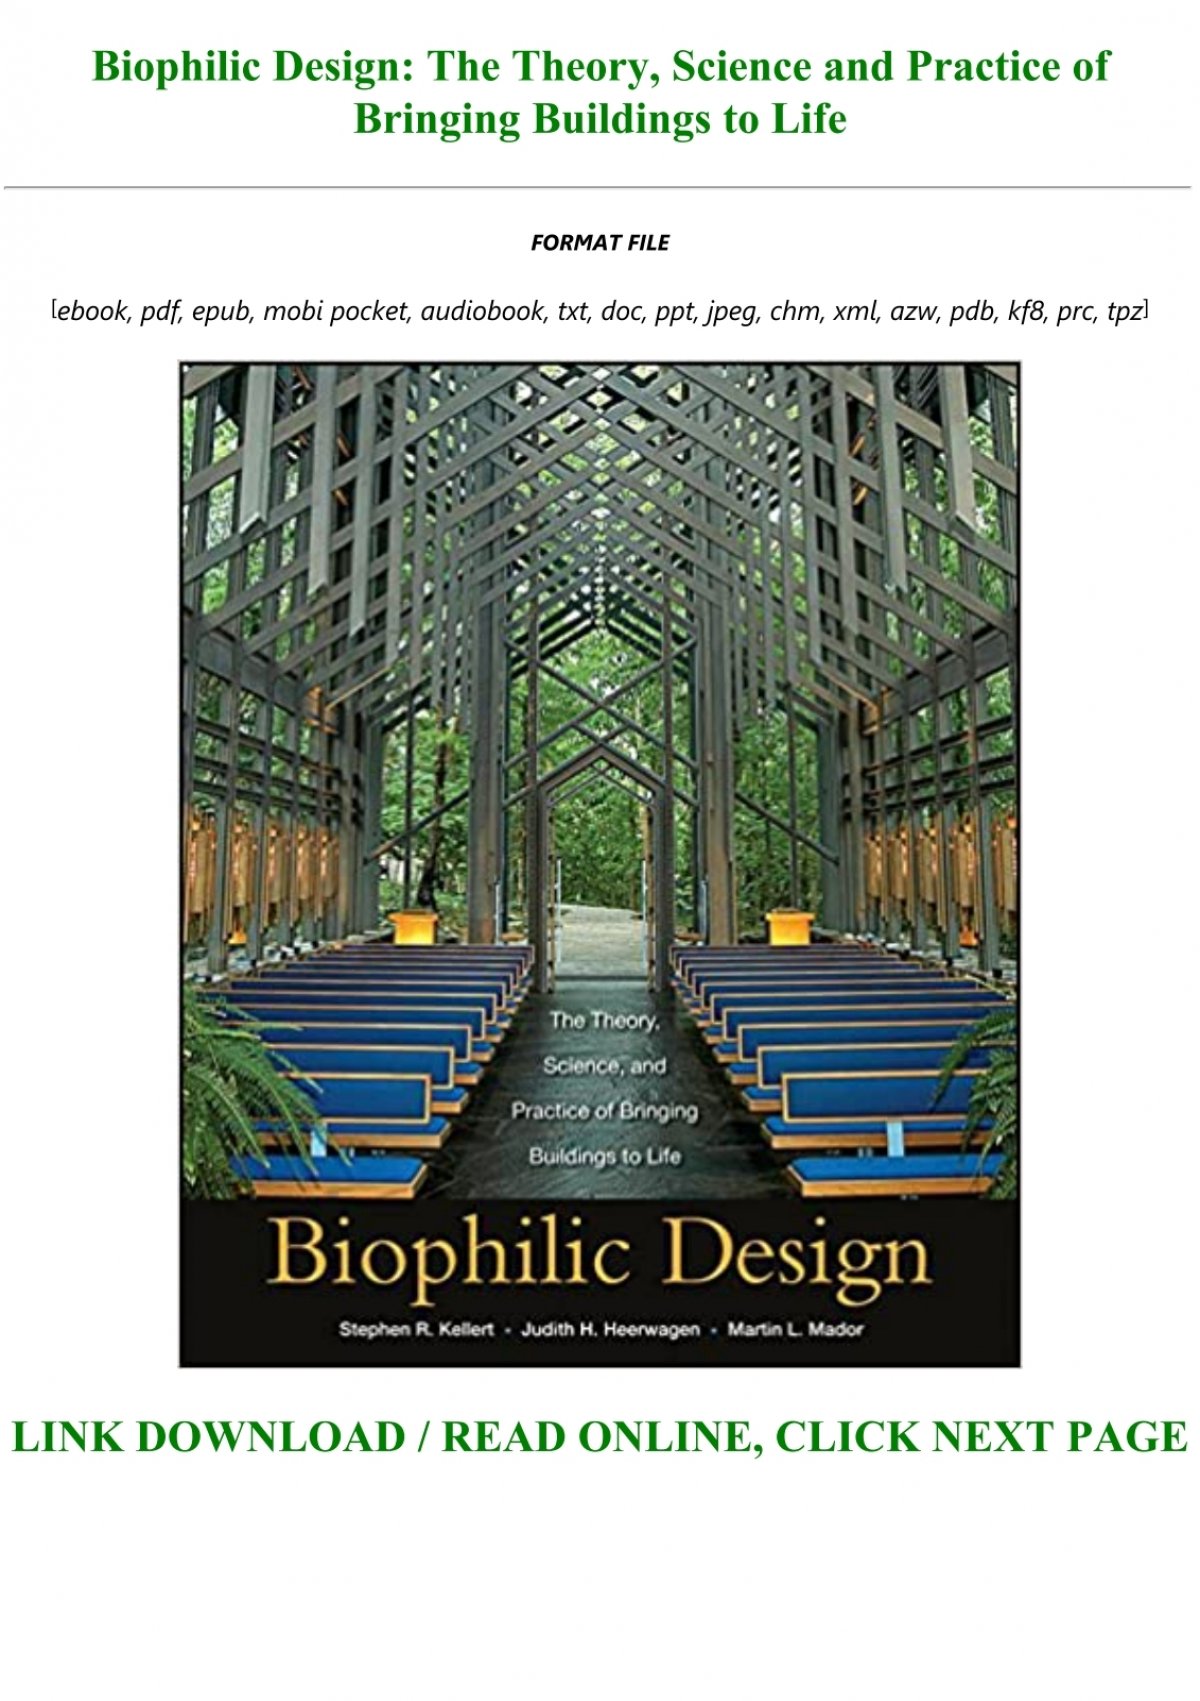 [GET] PDF Biophilic Design: The Theory, Science and Practice of